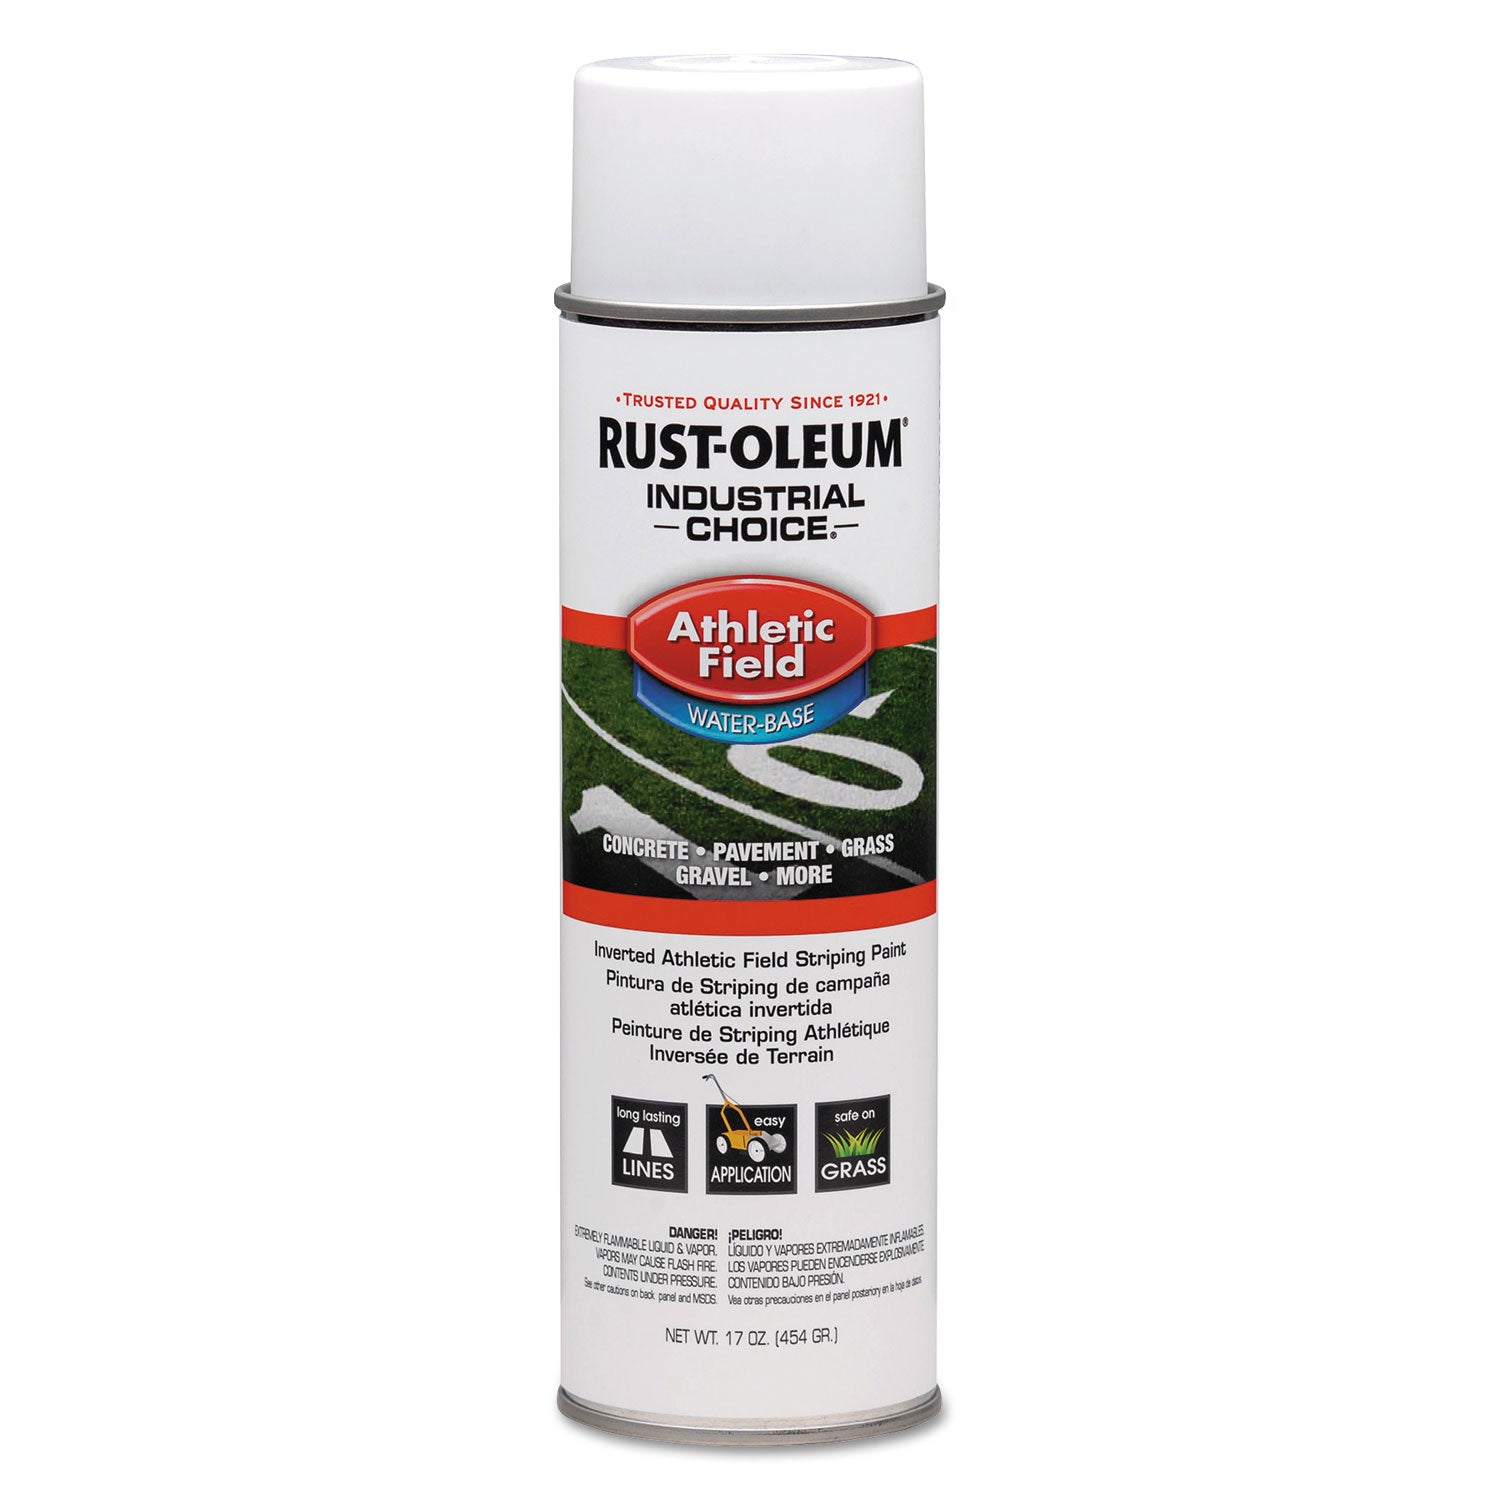 industrial-choice-athletic-field-inverted-striping-paint-flat-athletic-inverted-white-17-oz-aerosol-can-12-carton_rst206043ct - 1